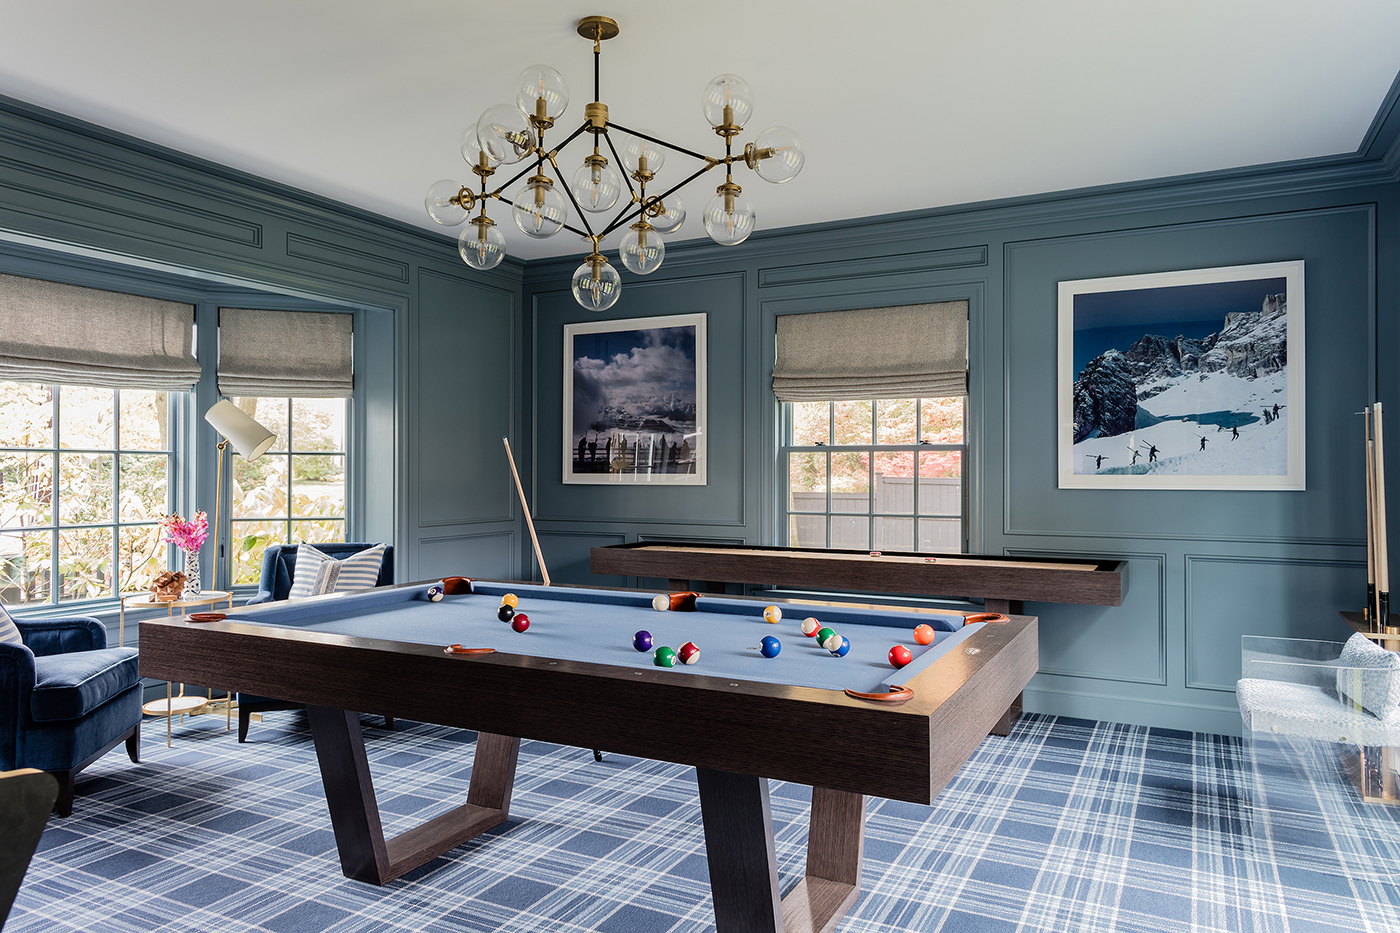 Home Game Room in Blues - Erin Gates Design; Michael J. Lee Photography